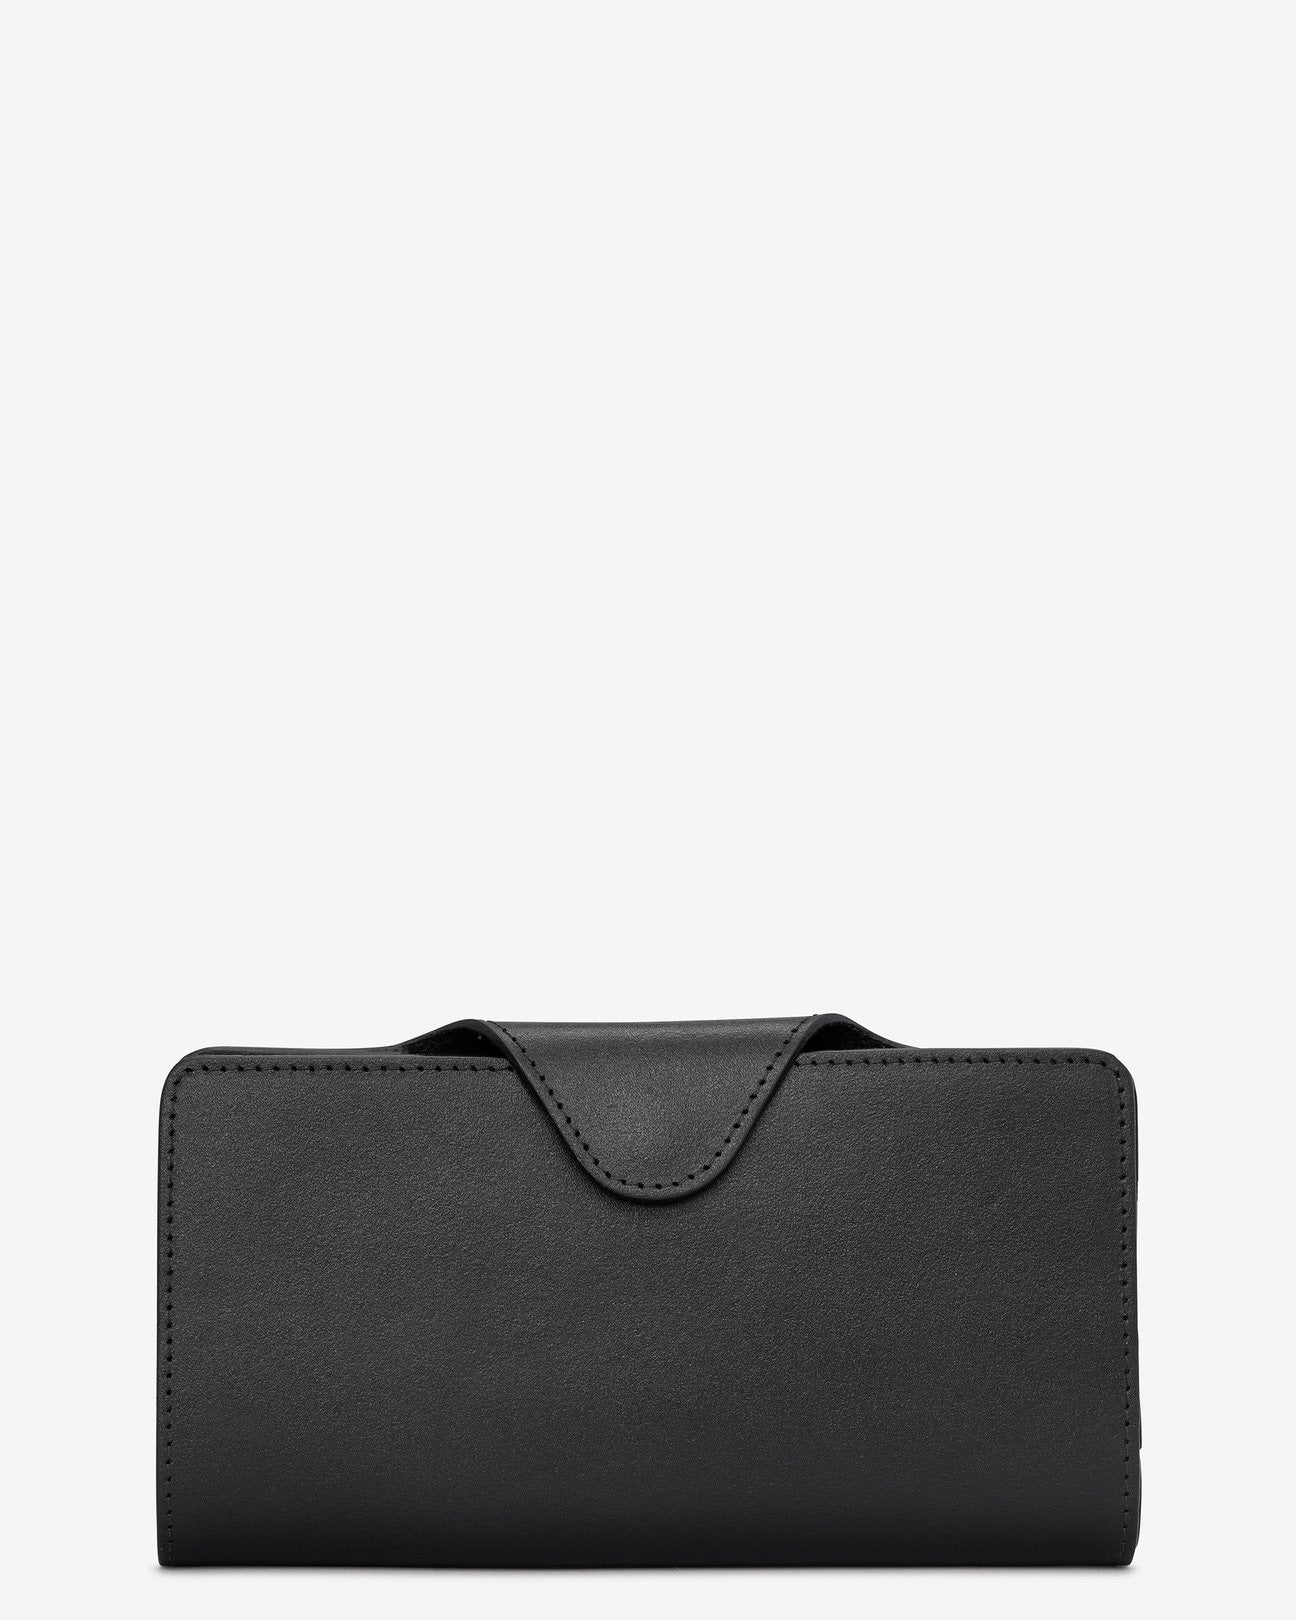 Yoshi Black Satchel Leather Purse - Sands Boutique clothing and gifts